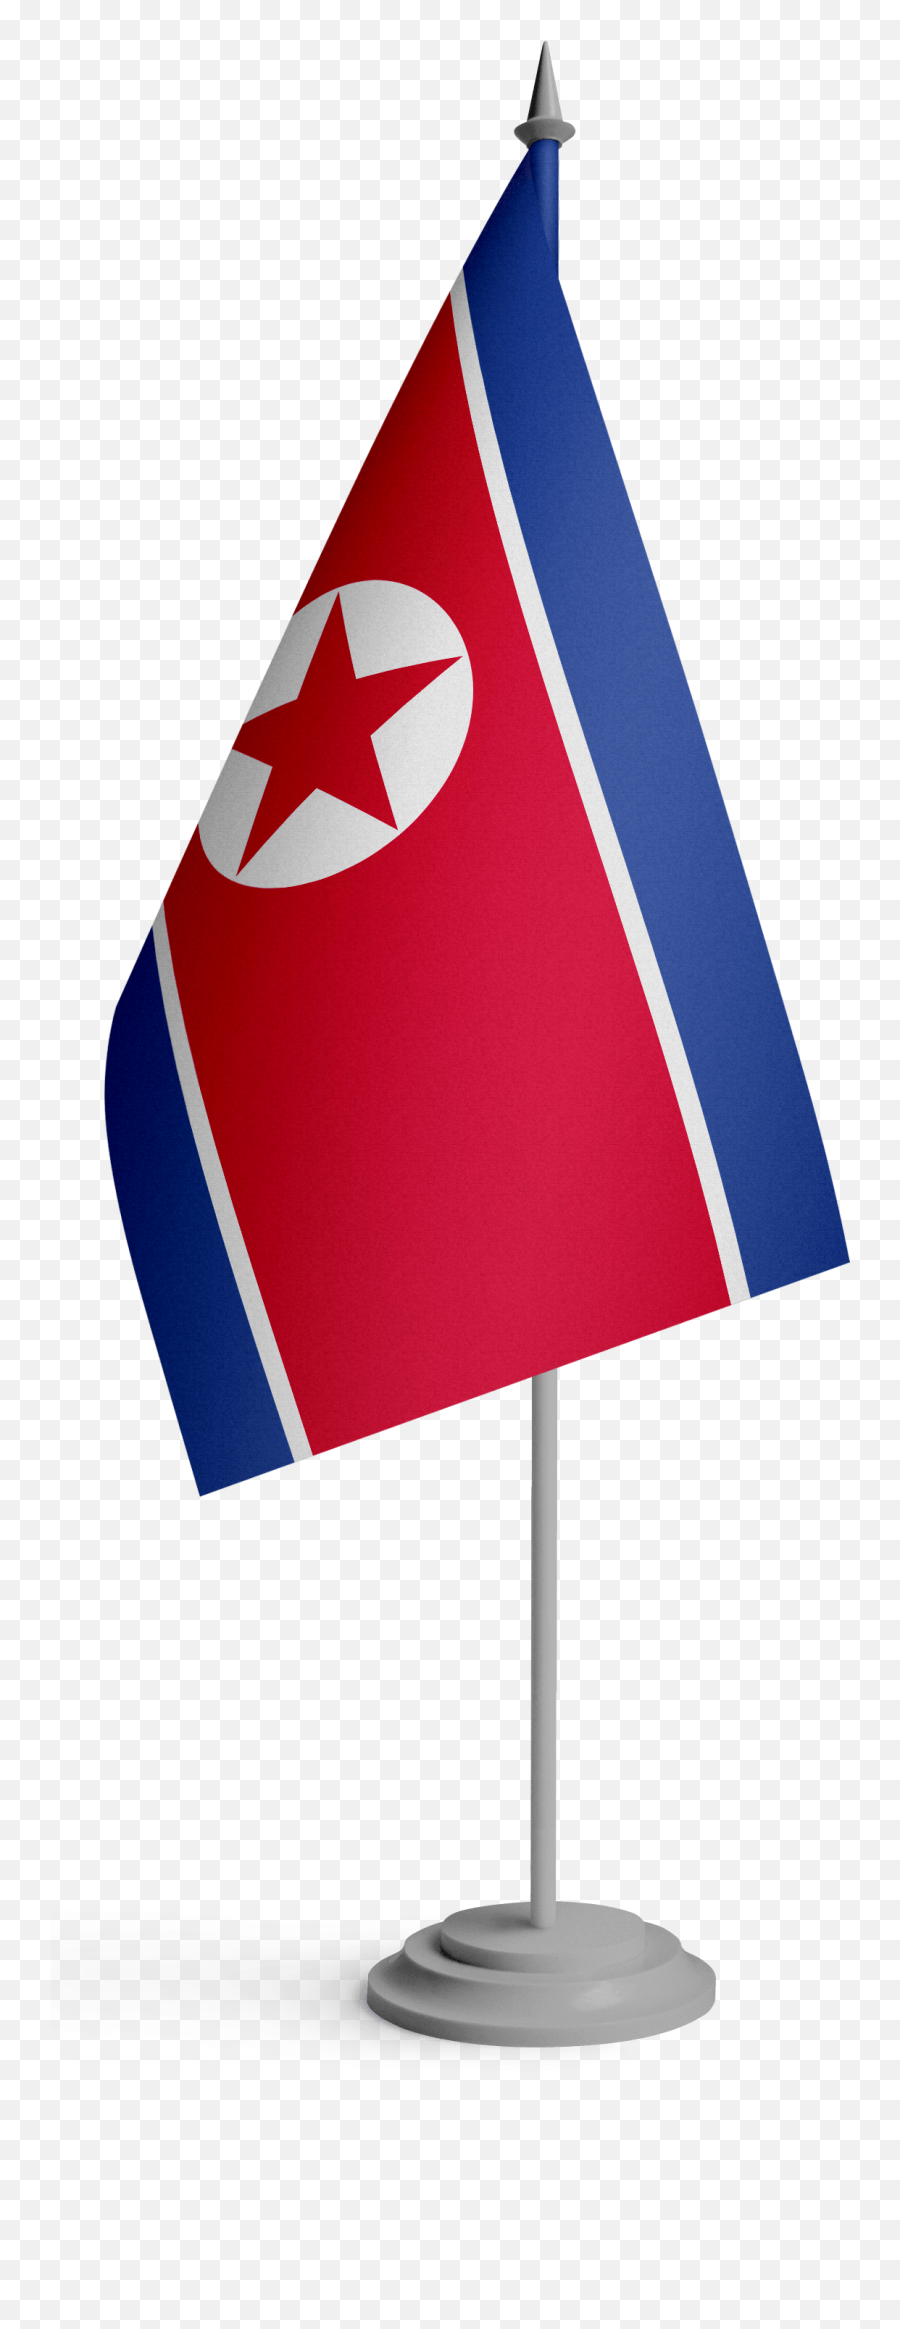 North Korea Flag Png Transparent Images All - Flagpole,Korean Flag Icon Png